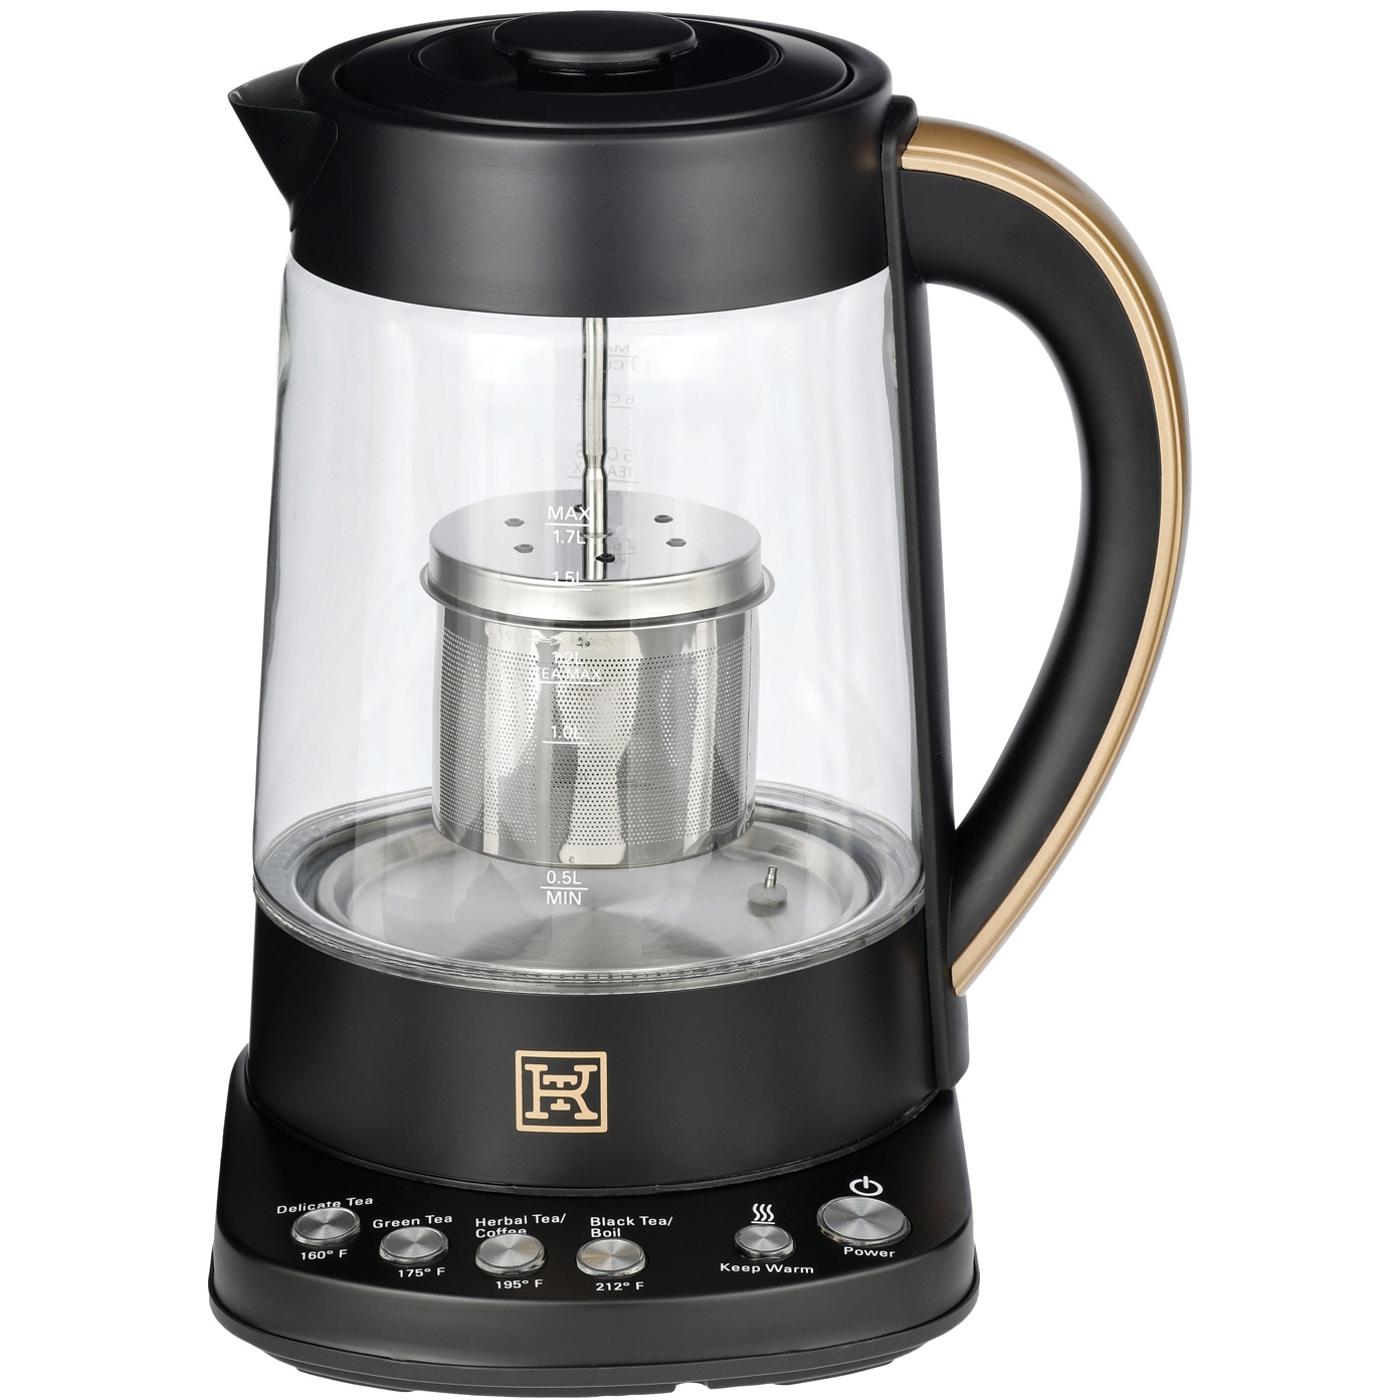 Commercial Kettle - 0.5L Stainless Steel